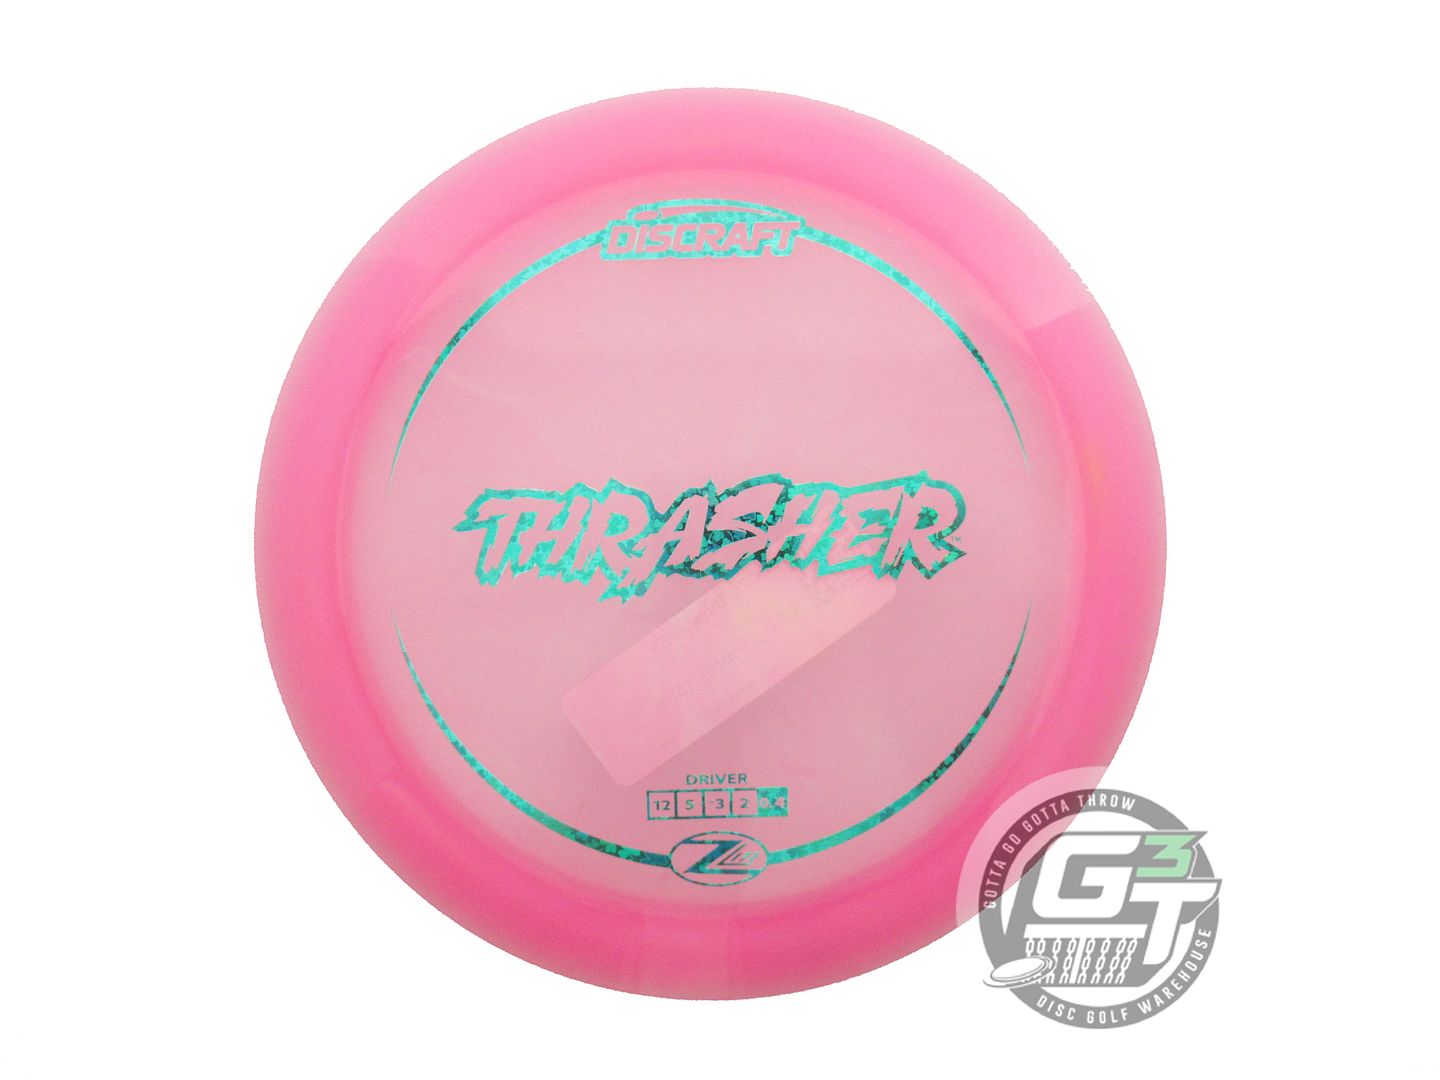 Discraft Z Lite Thrasher Distance Driver Golf Disc (Individually Listed)